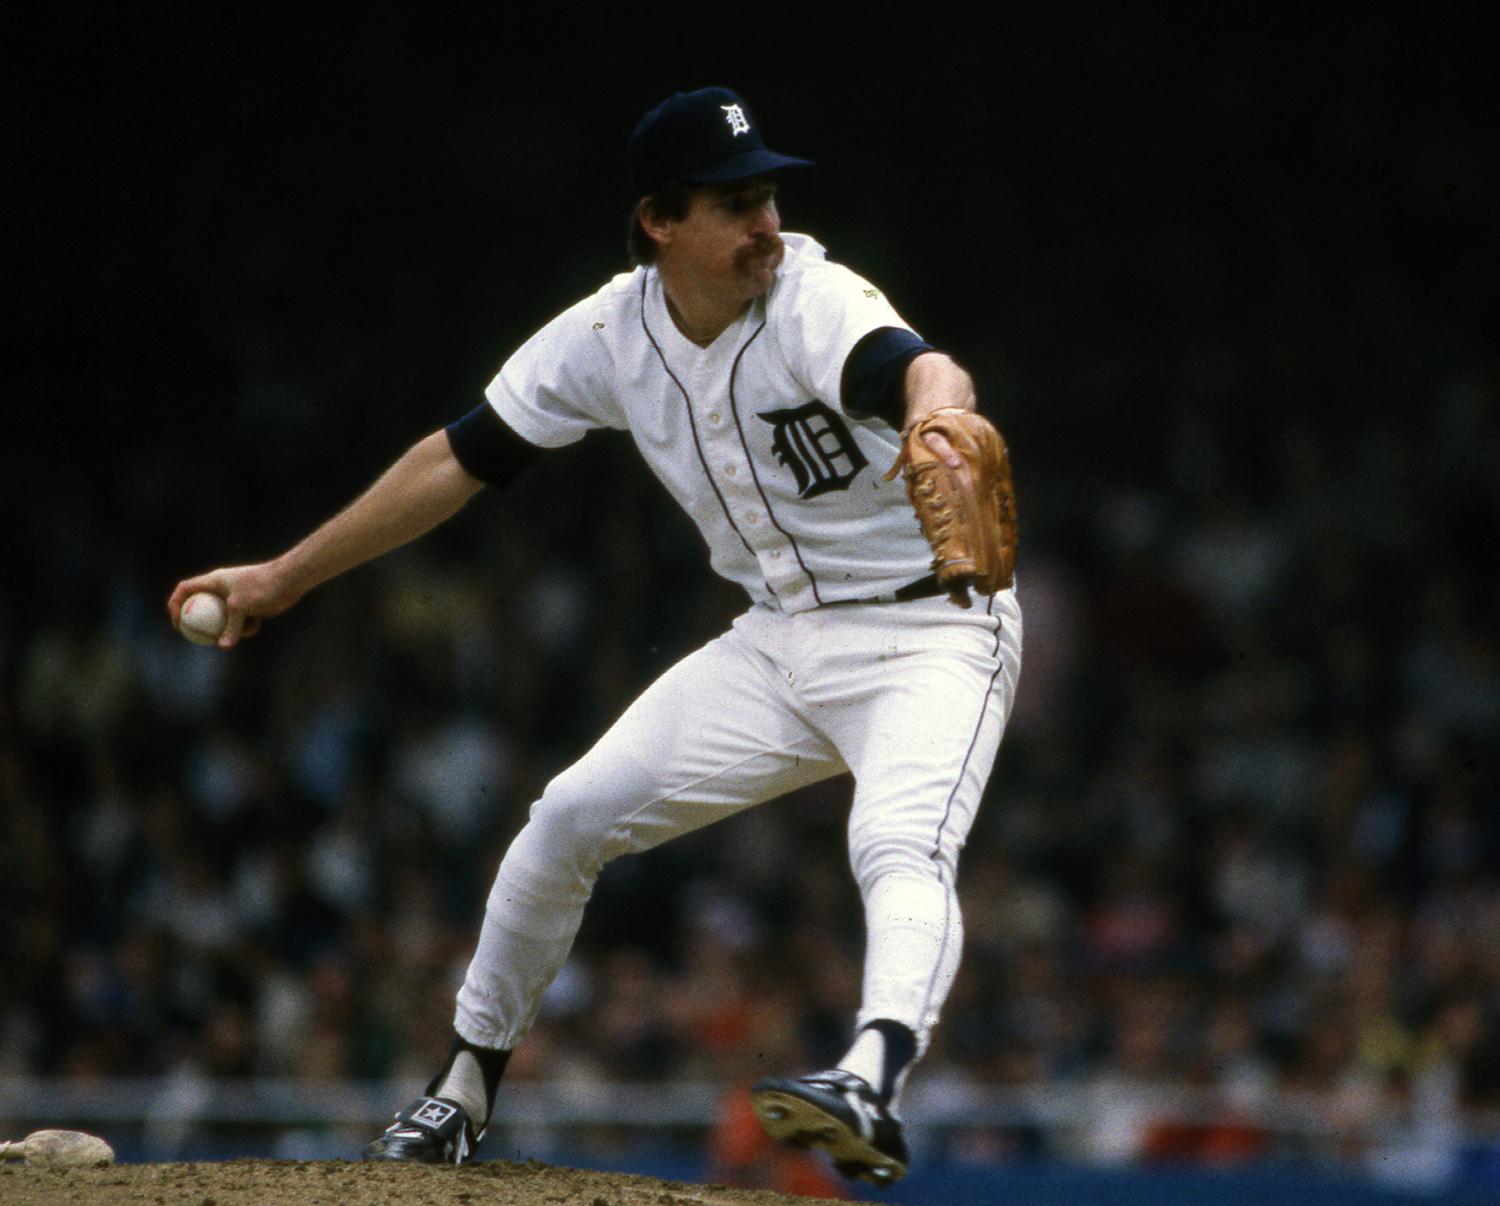 Tigertown: Morris, Trammell elected to baseball Hall of Fame